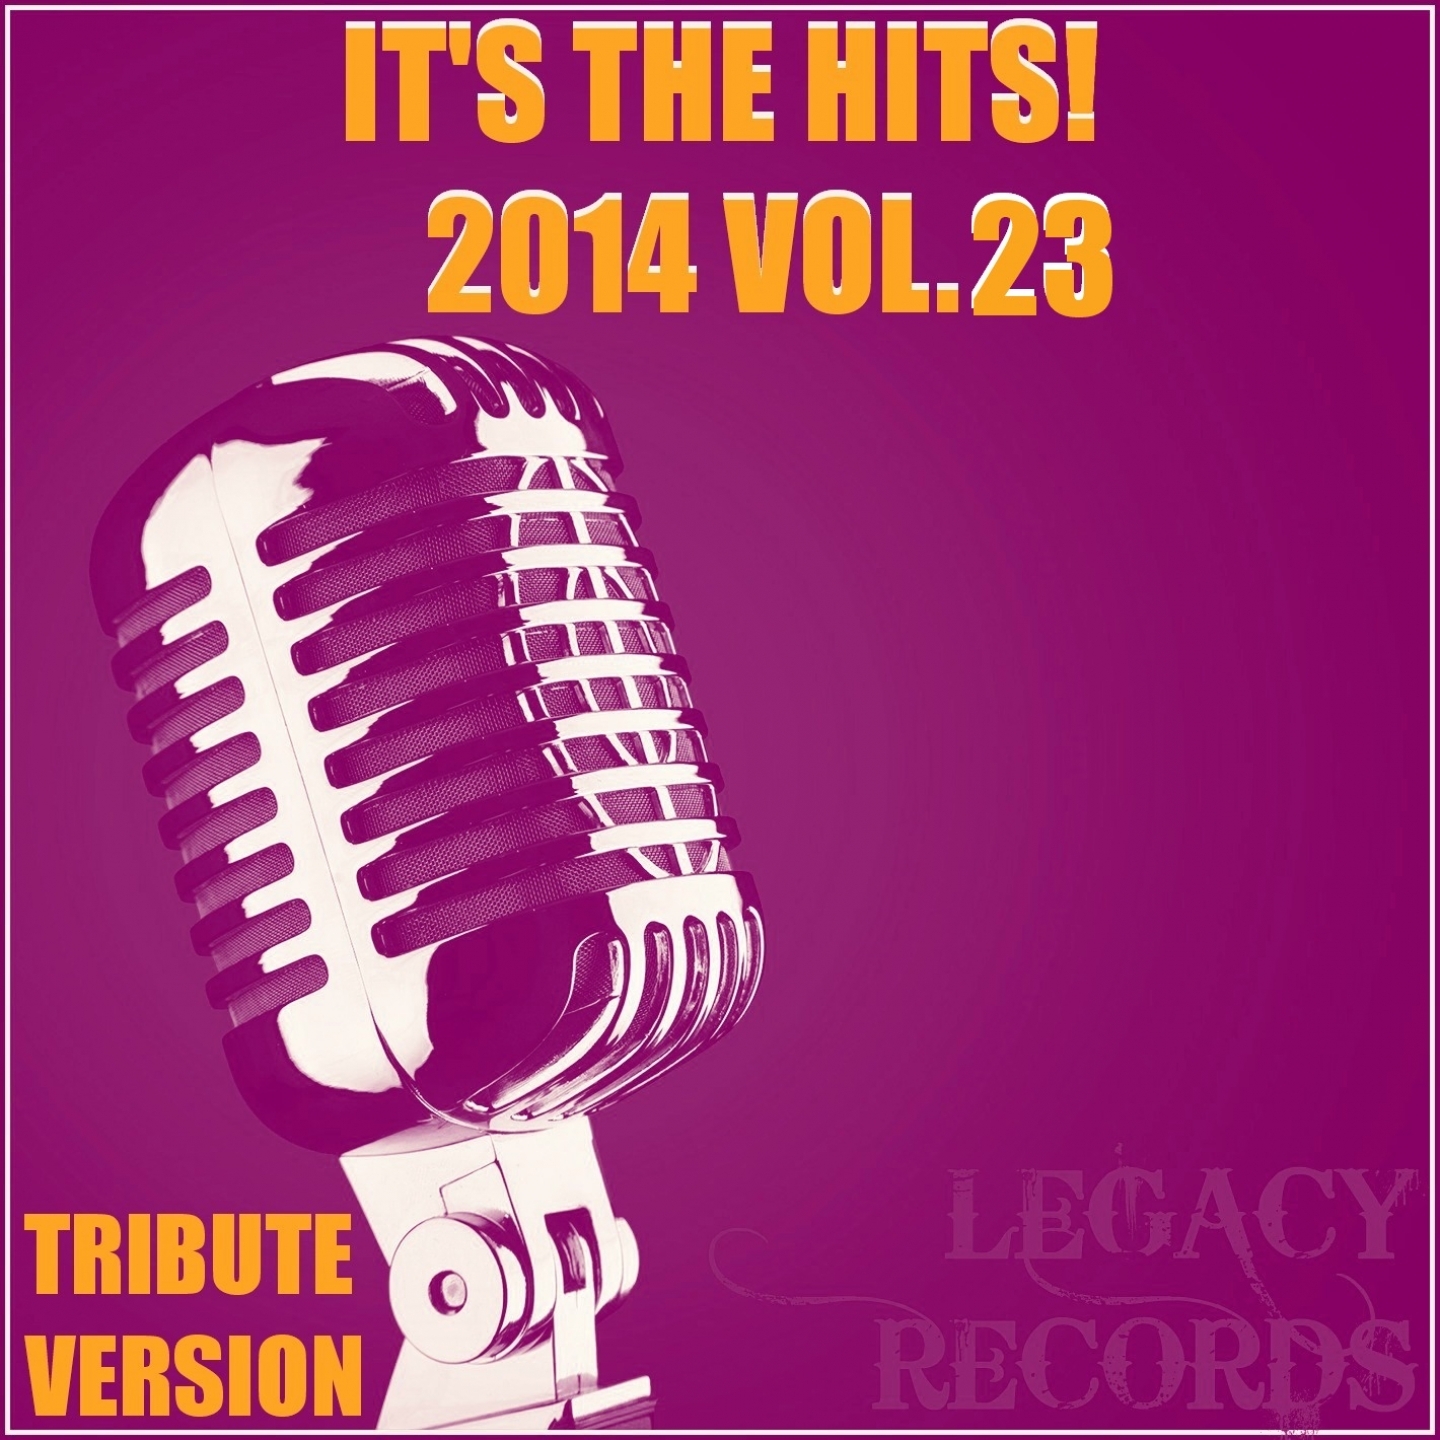 New Tribute Kings - It's the Hits! 2014, Vol. 23